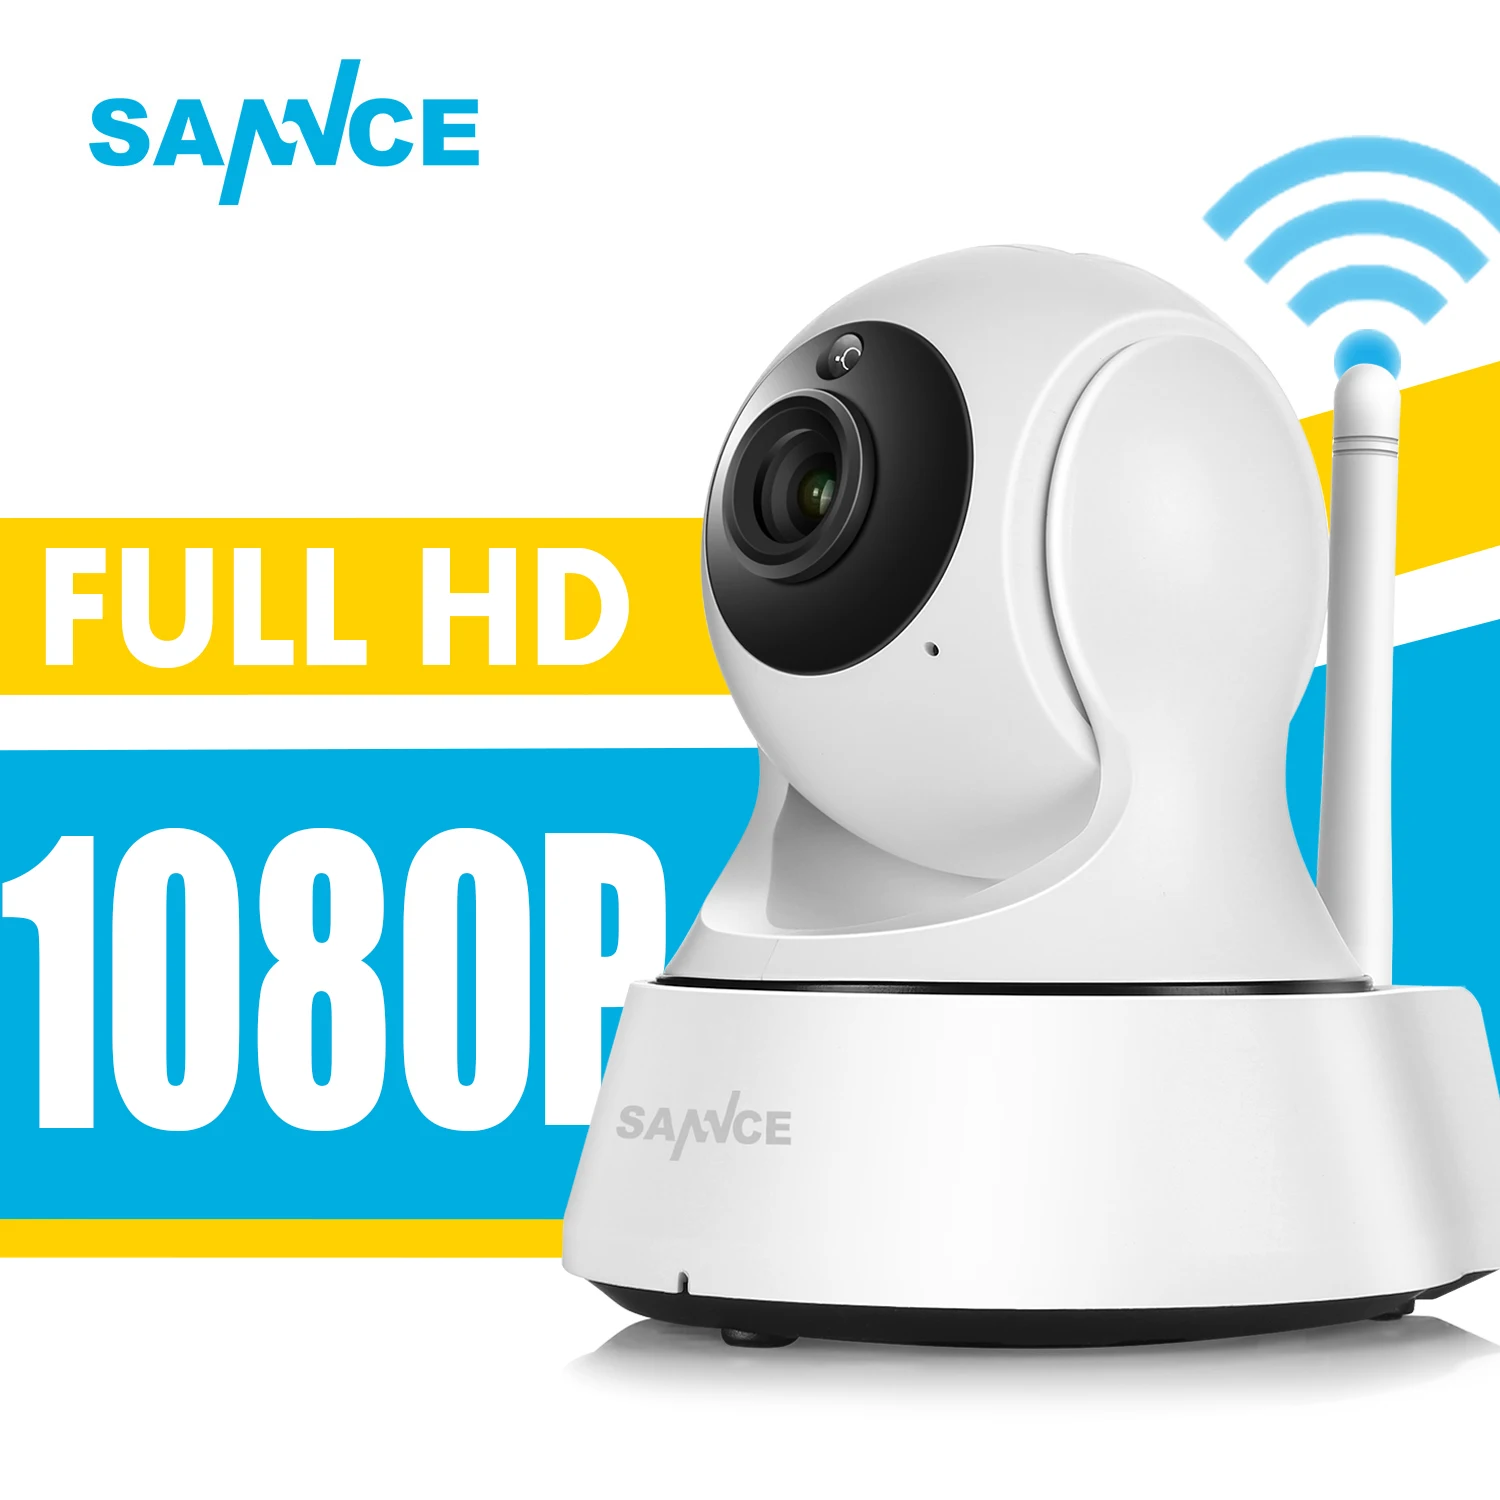 SANNCE Full HD 1080P Mini Wi-fi Camera Wireless IP Sucurity CCTV Camera Wifi Network Smart Night Vision Baby Monitor 10ft cable